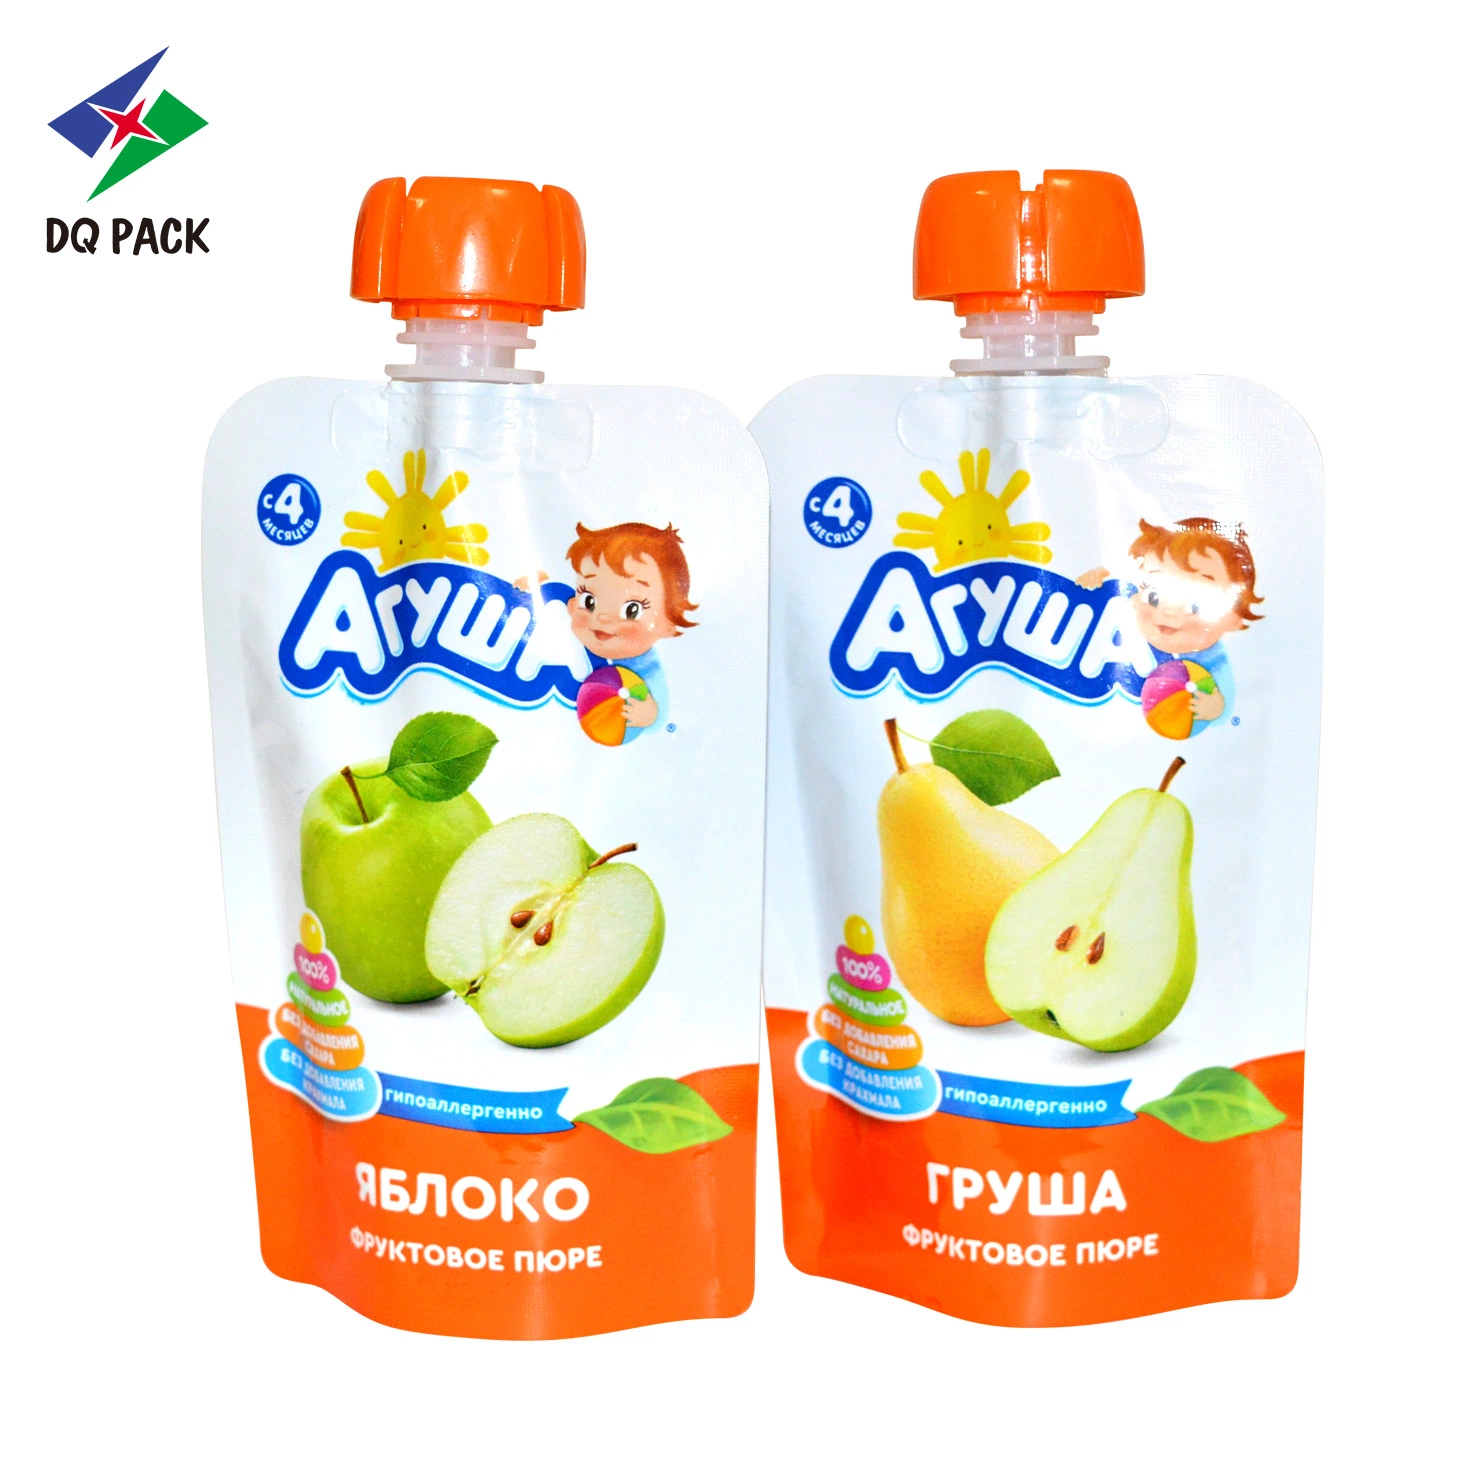 Custom Printed Doypack Packing Sauce Liquid Drink Juice Milk Yogurt Food Packaging Stand up Spout Pouch Bag with Spout Plastic Pouch